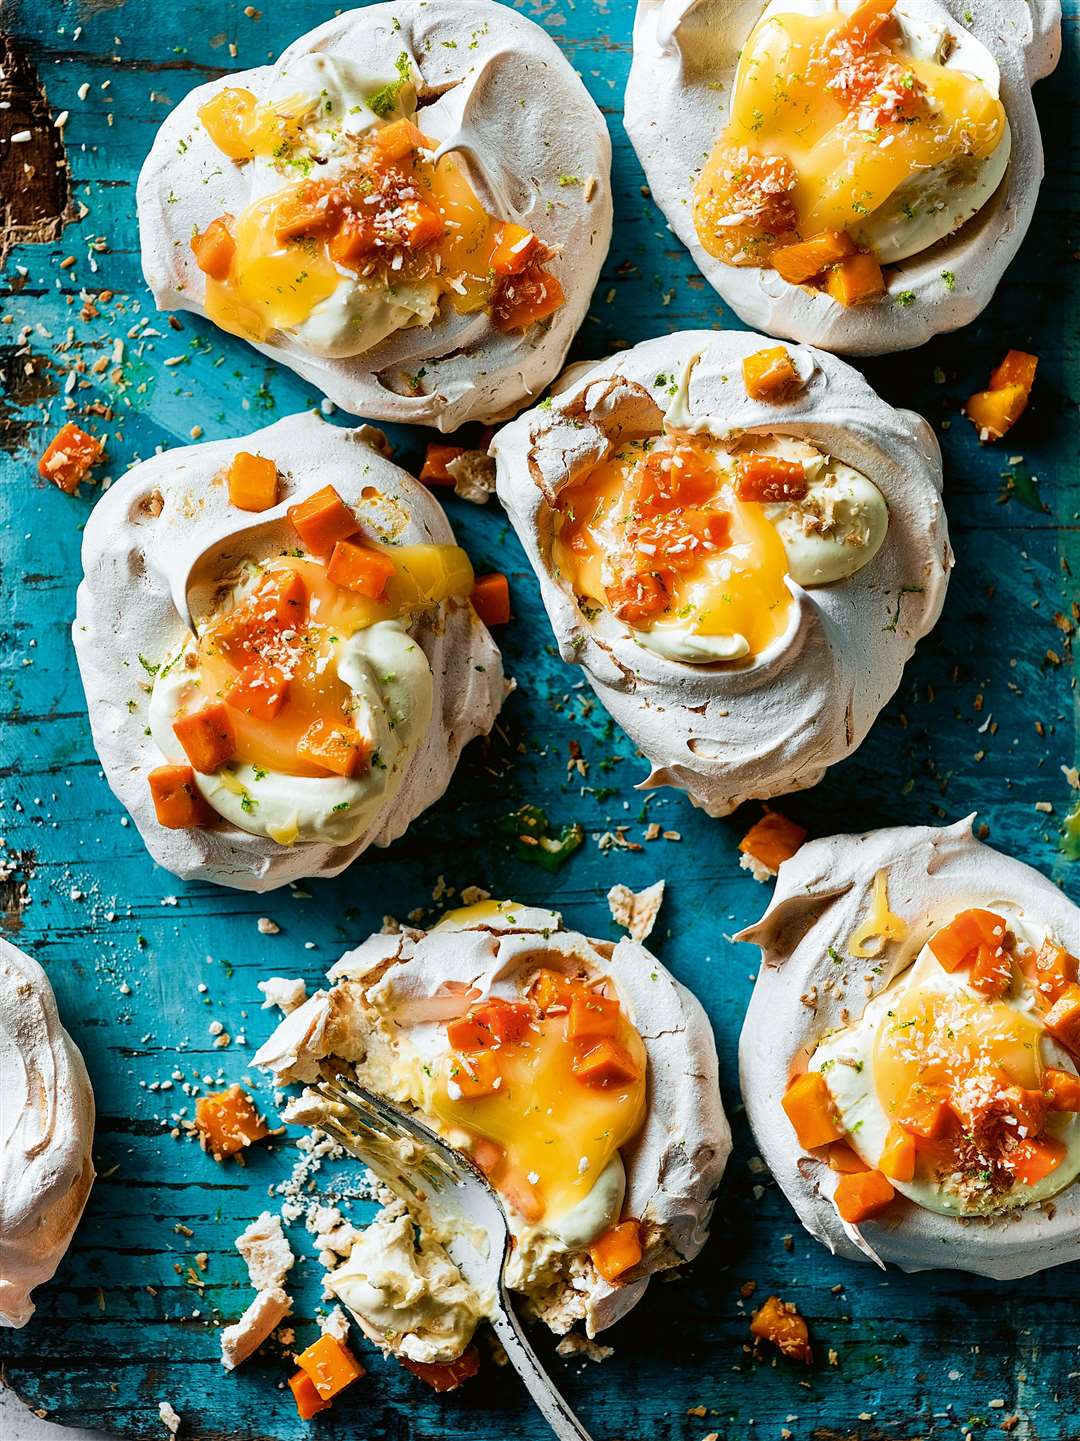 Mango, lime and coconut meringue recipe from The Rangoon Sisters: Recipes From Our Burmese Family Kitchen by Emily and Amy Chung. Picture: Martin Poole/PA